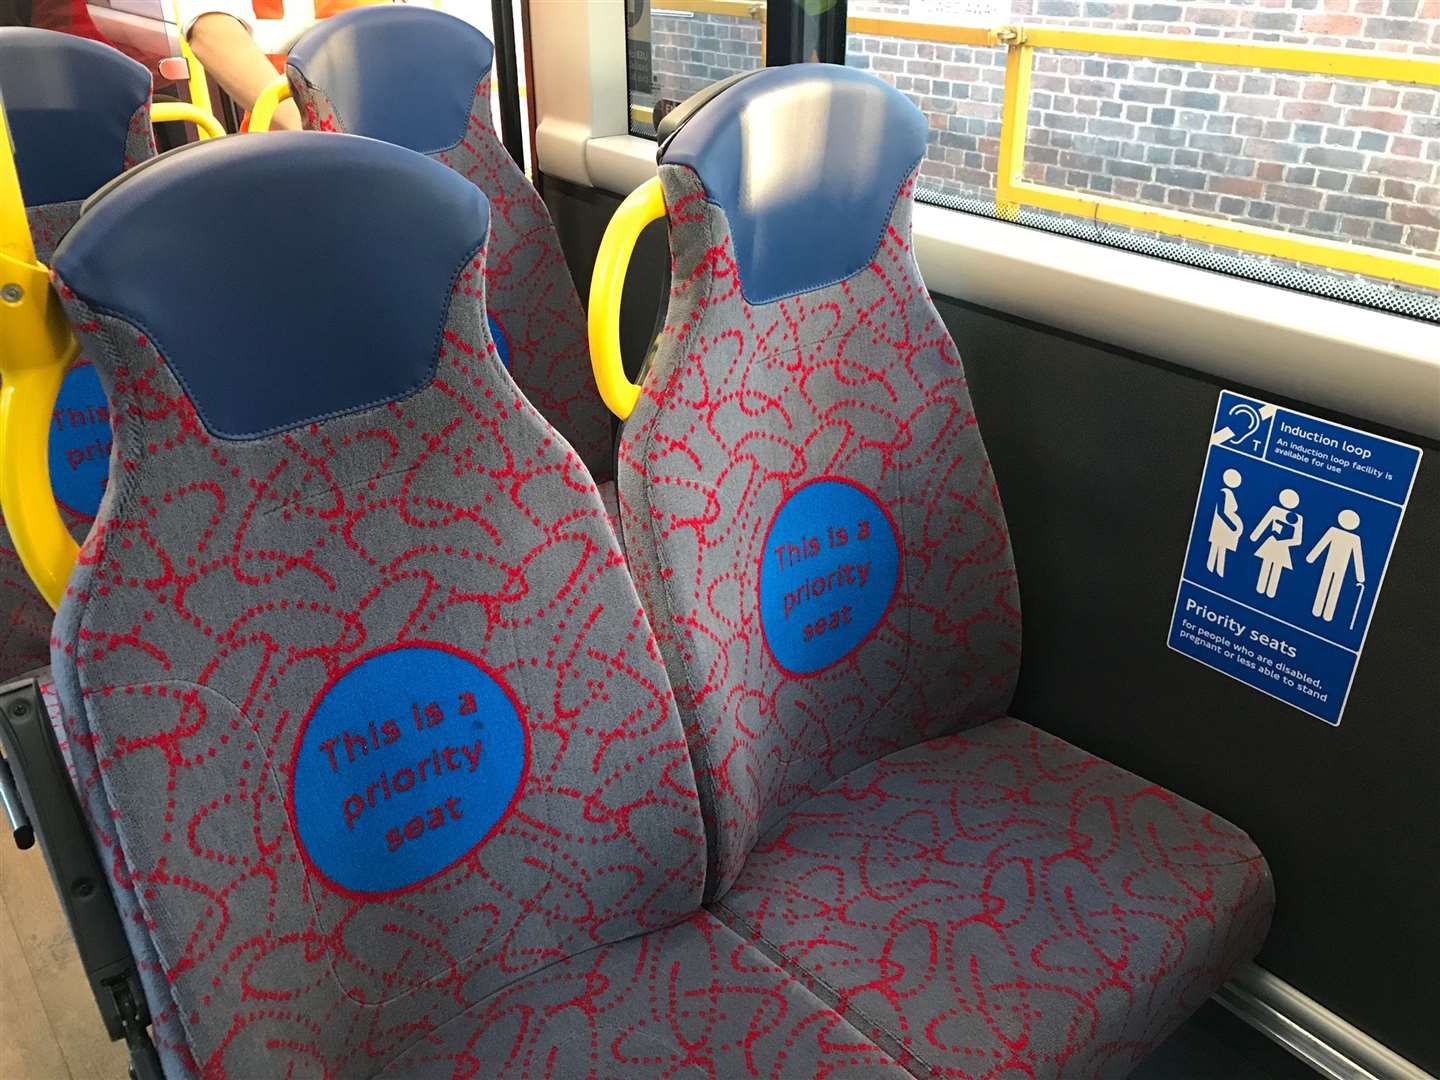 Priority seats on buses also help commuters to leave suitable spaces free